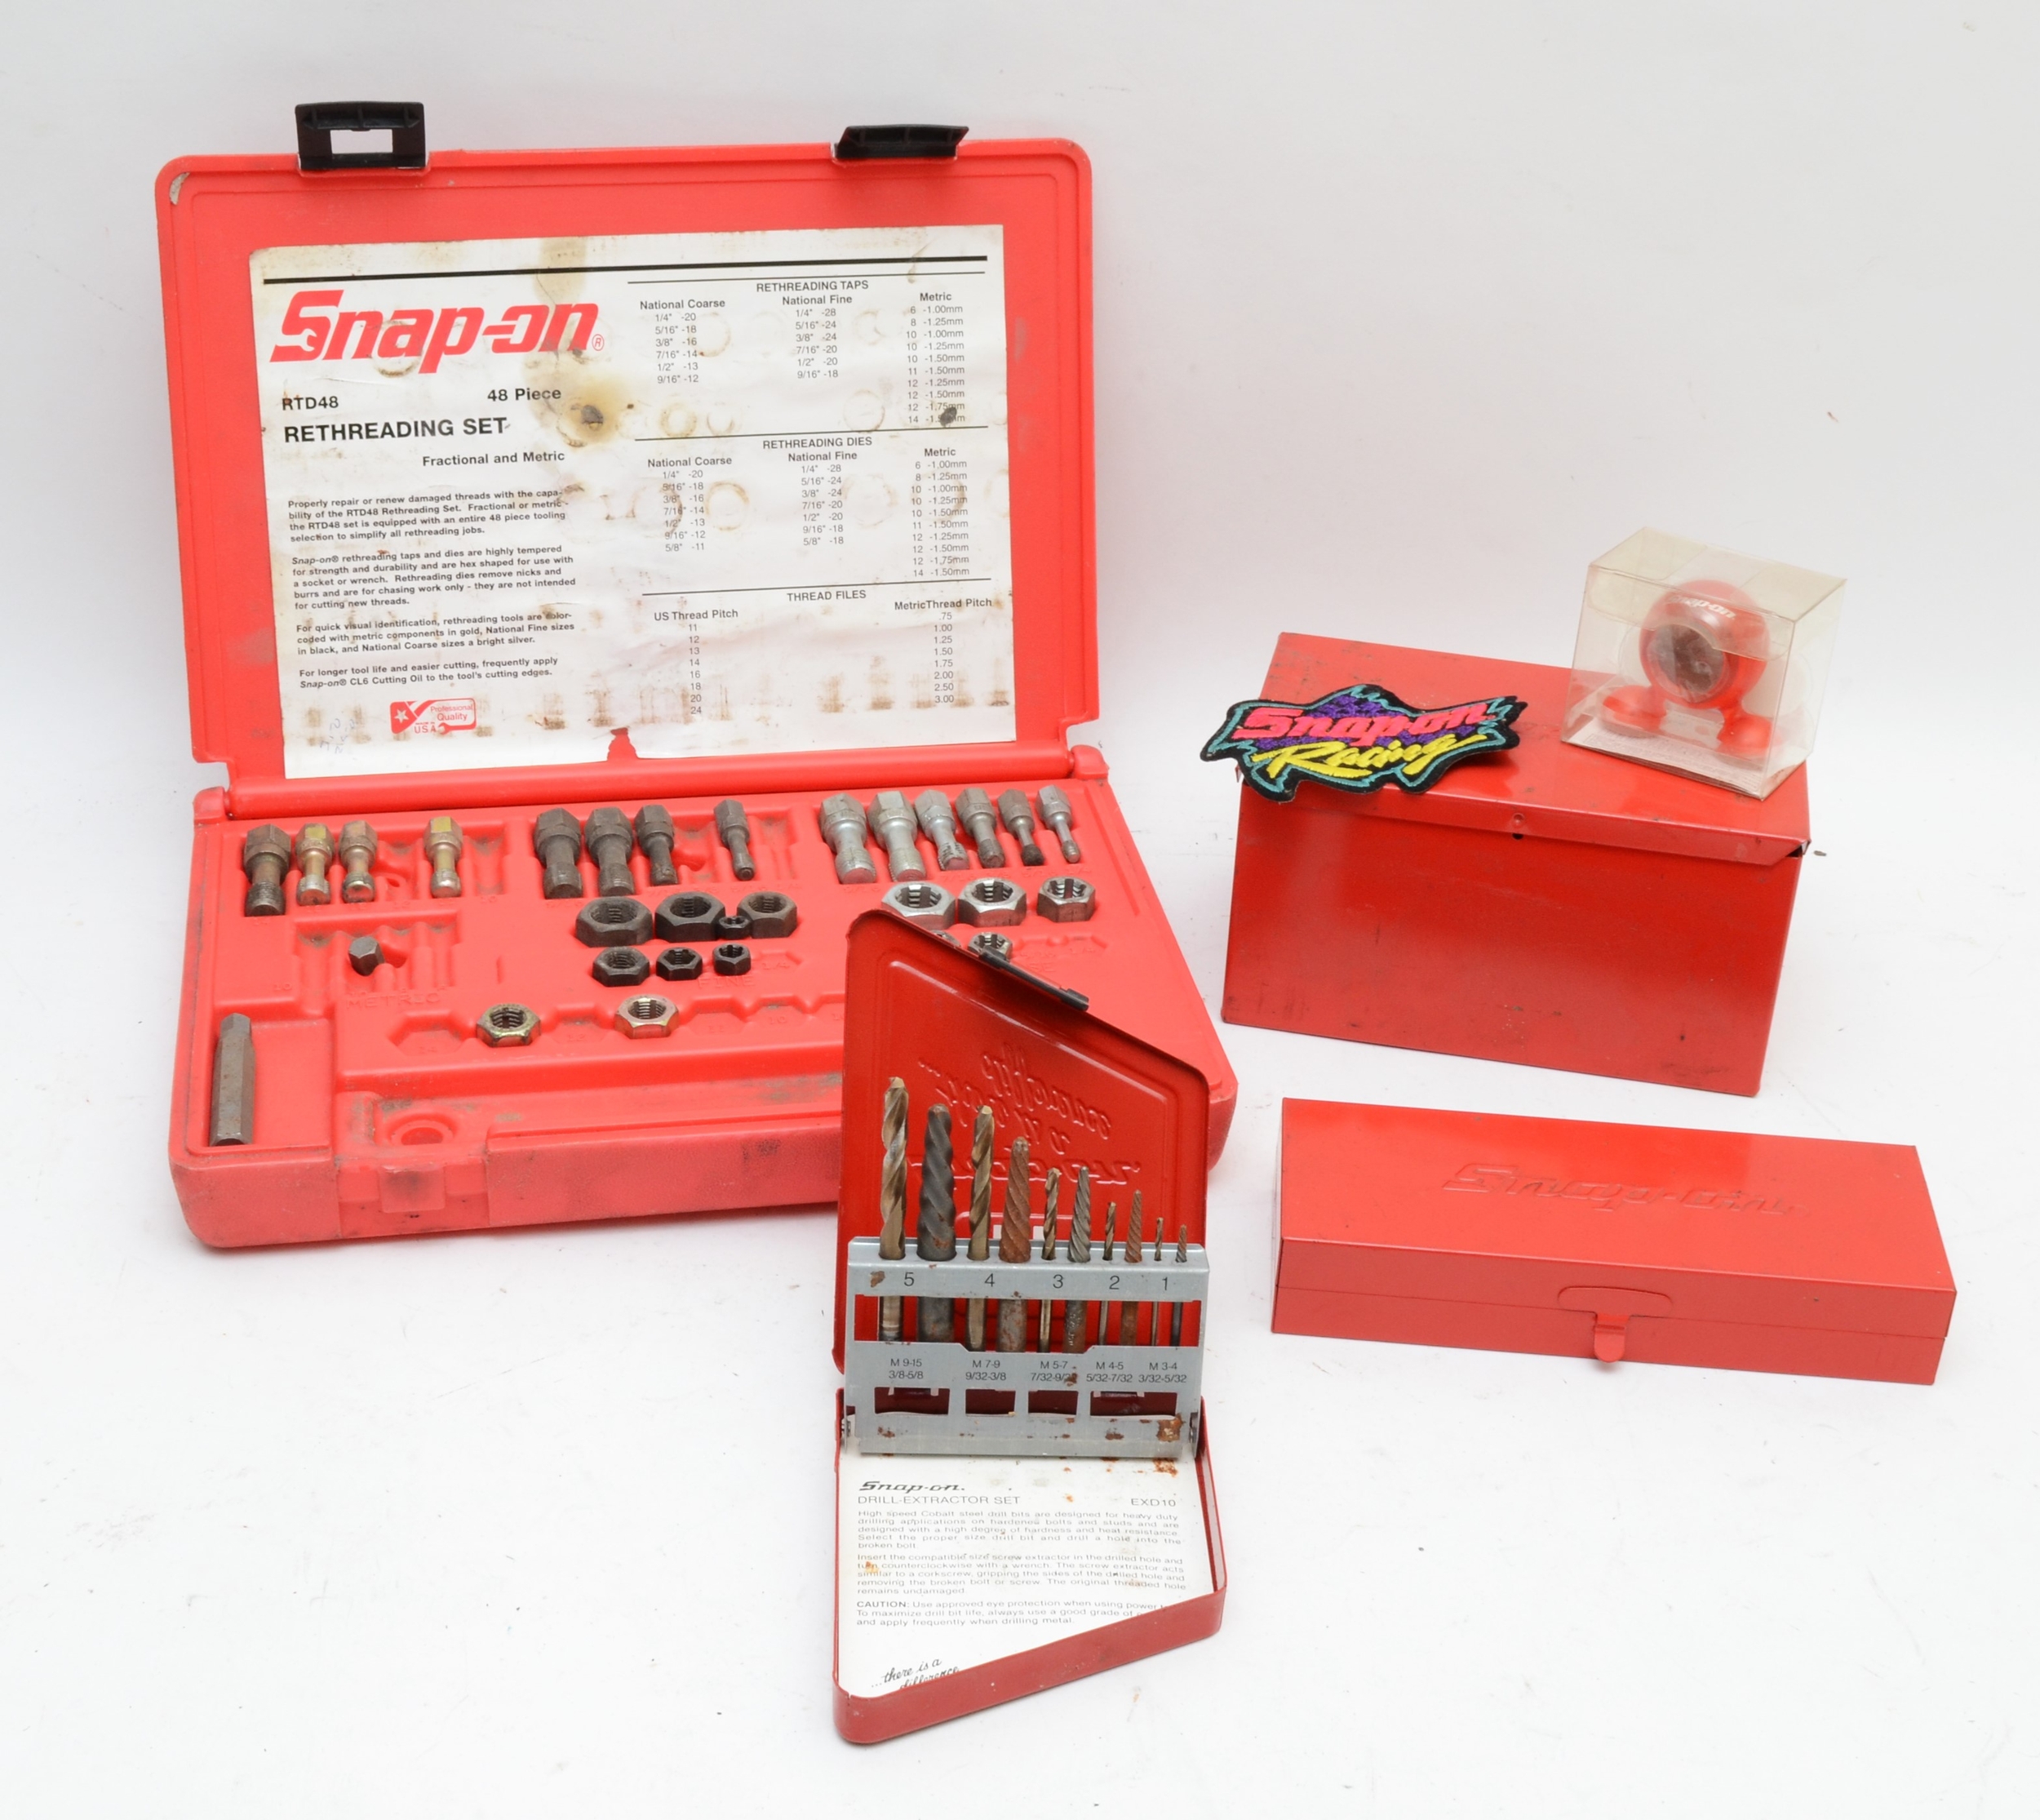 Snap-on drill extractor set, a part rethreading kit and two metal boxes